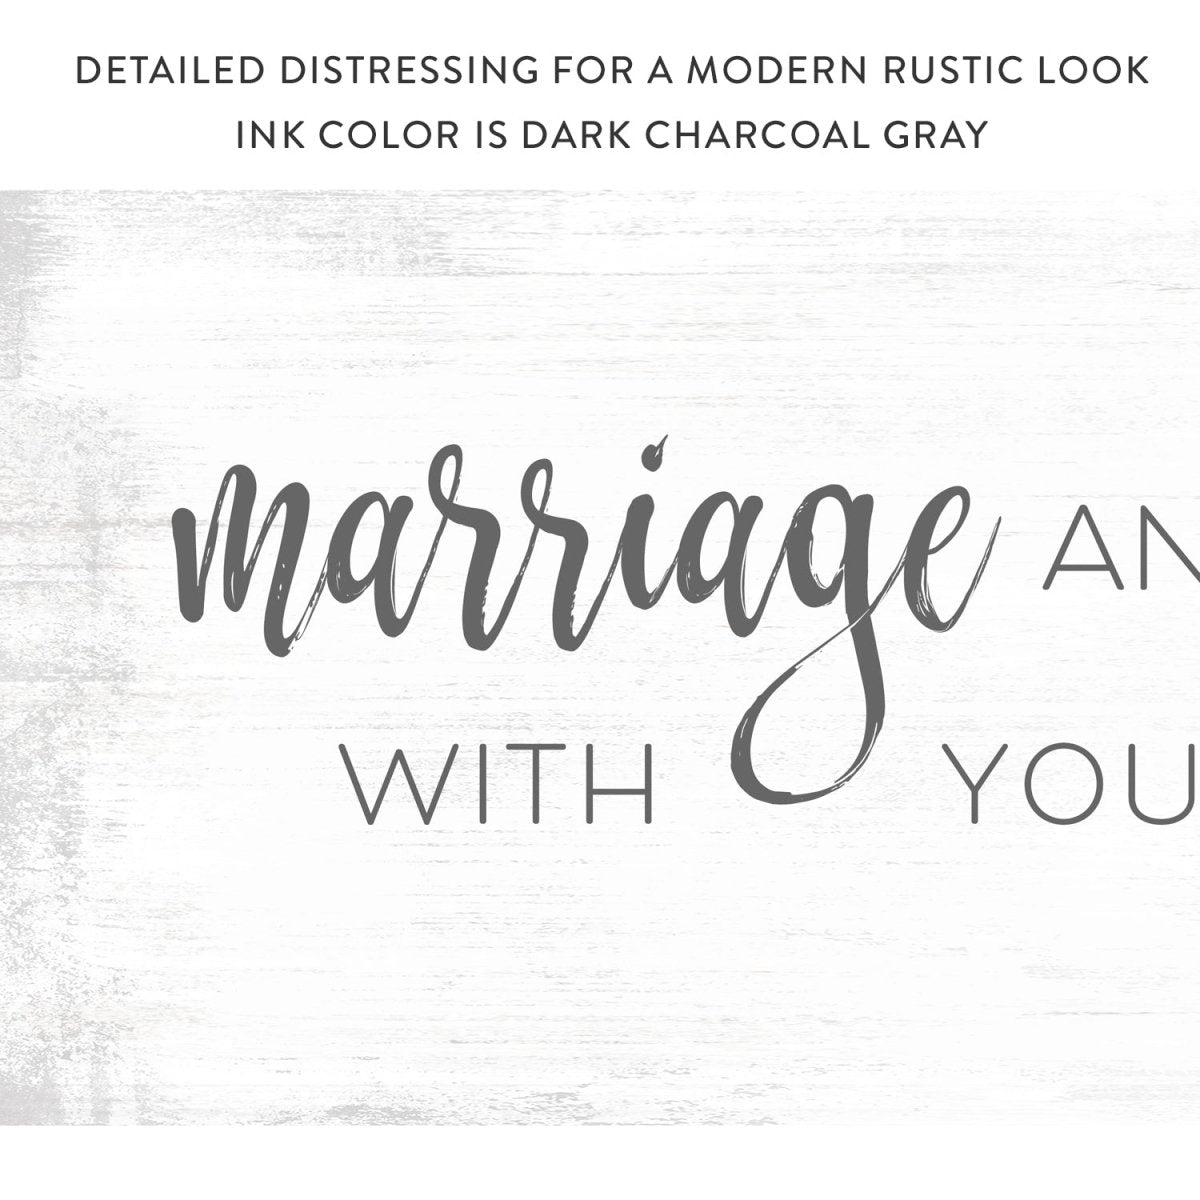 Marriage an Endless Sleepover with Your Favorite Weirdo Sign With Rustic Look - Pretty Perfect Studio